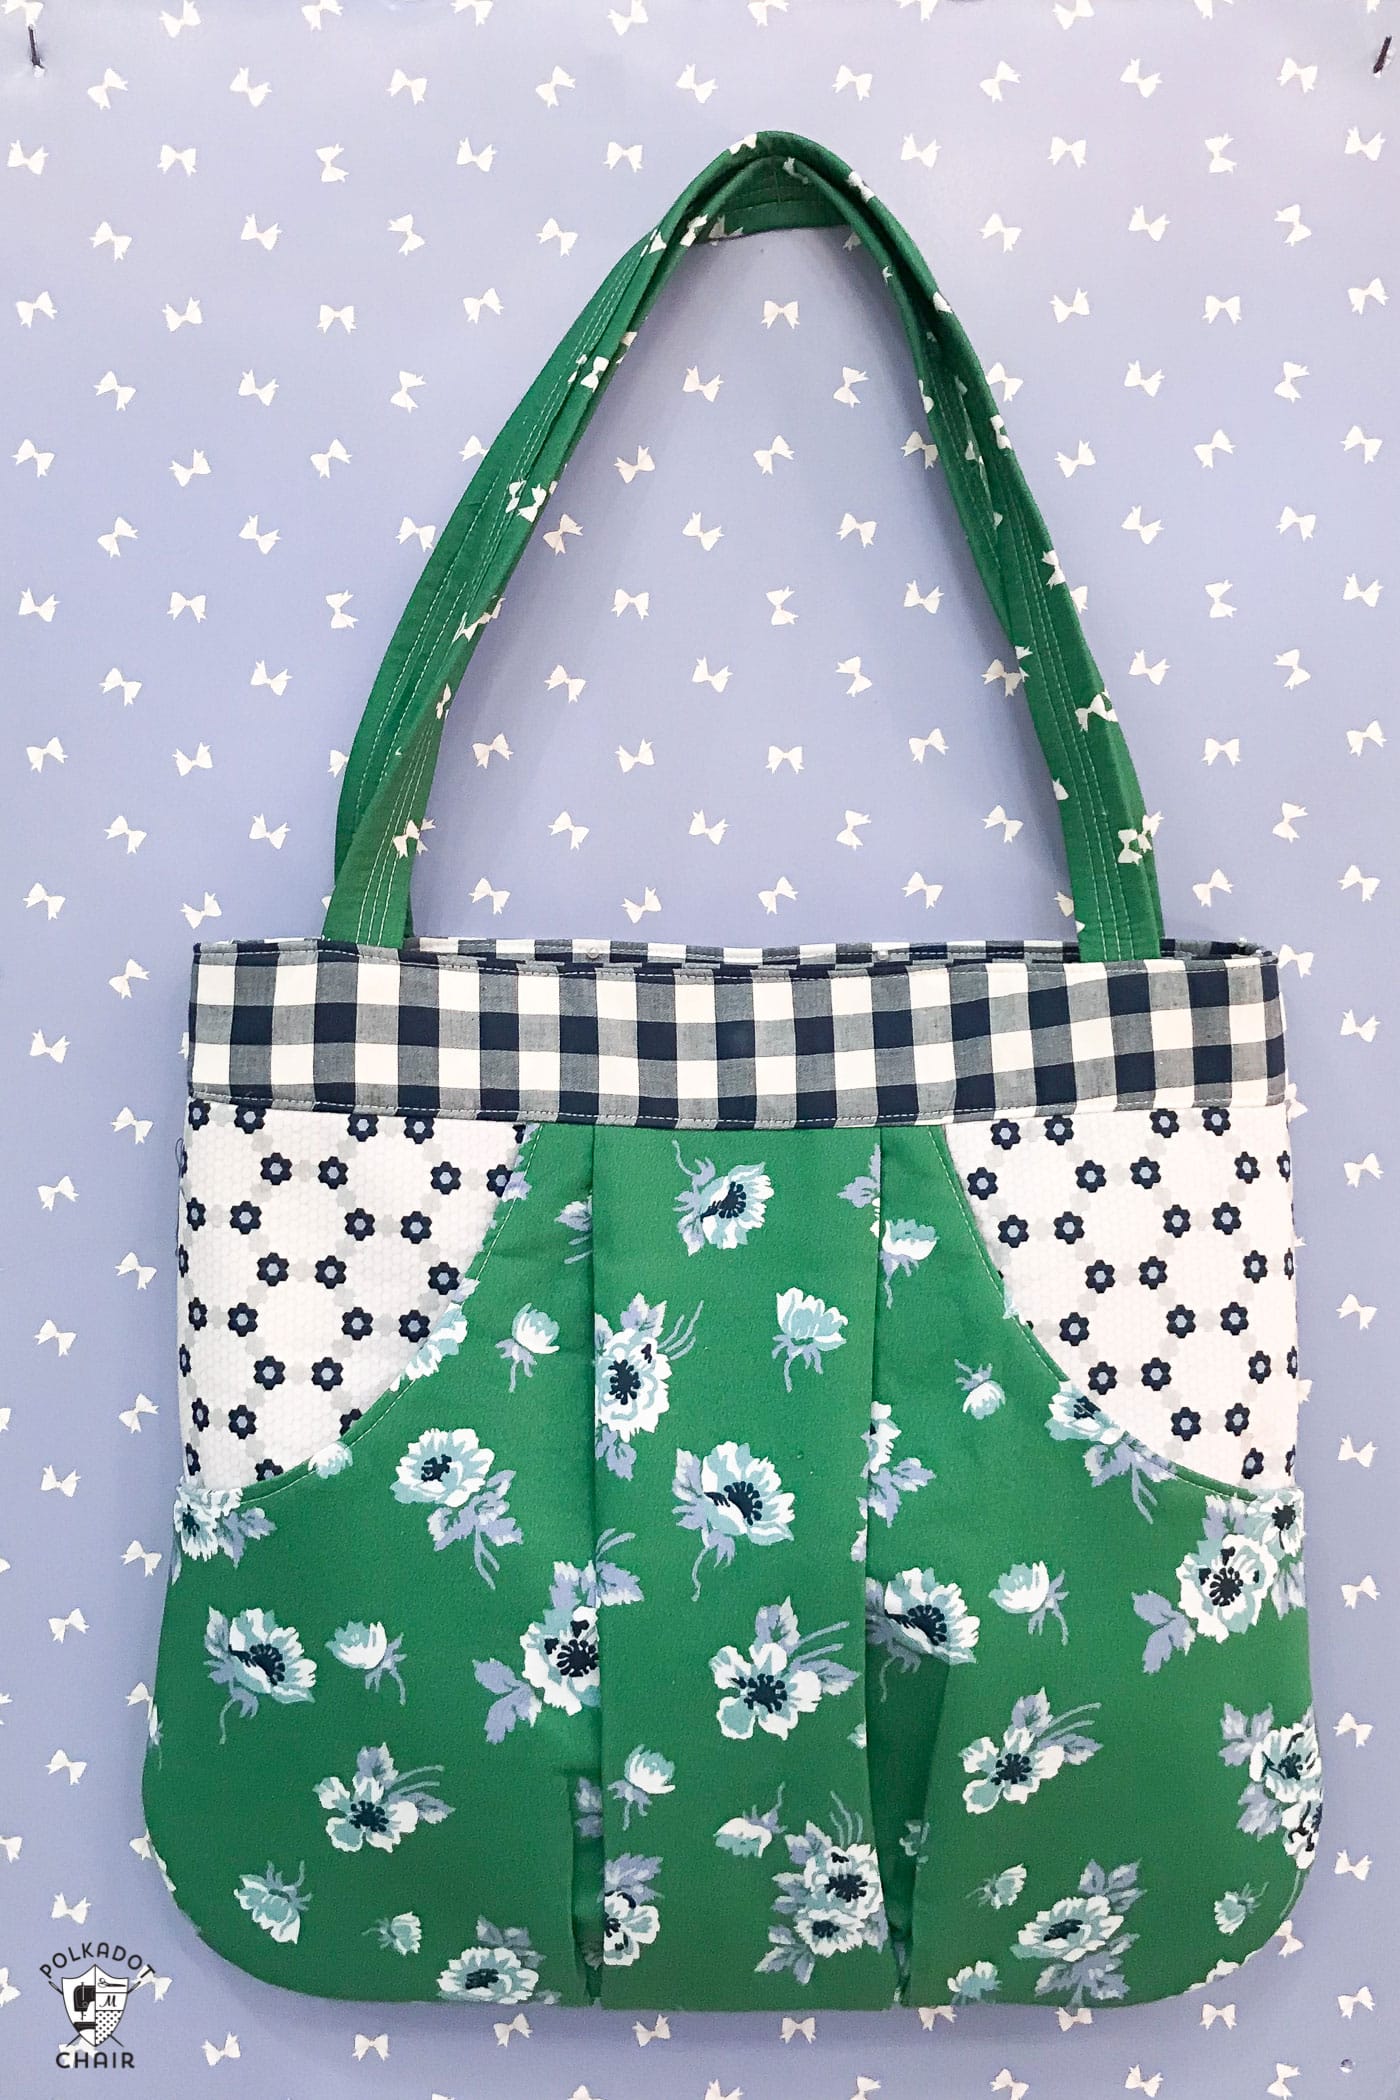 march-bag-derby-fabric - The Polka Dot Chair